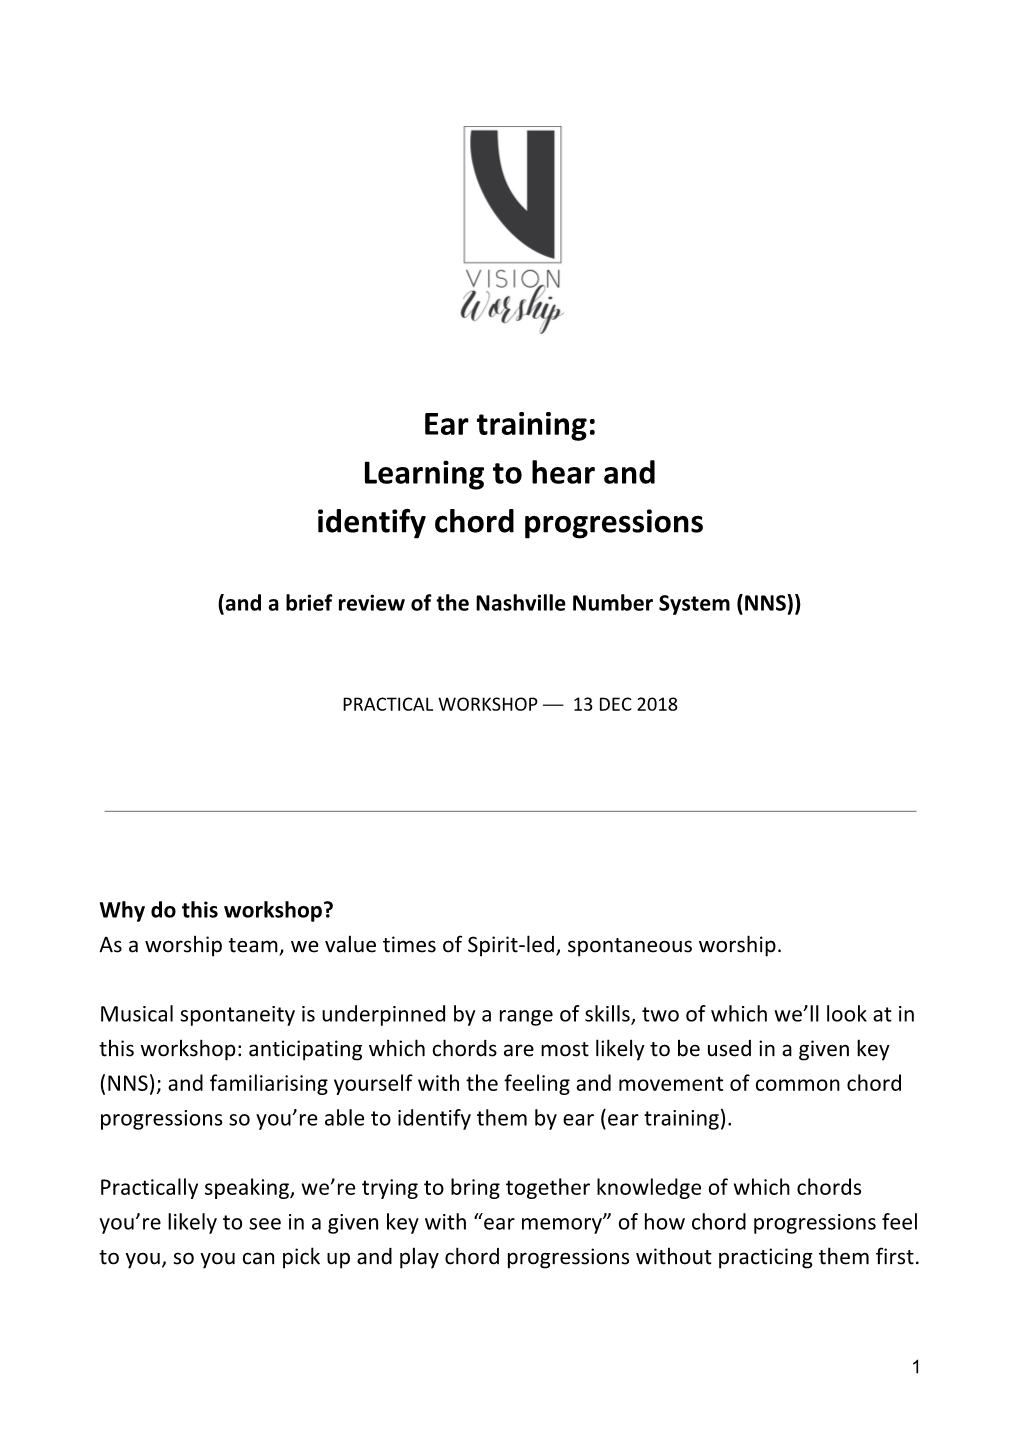 Ear Training: Learning to Hear and Identify Chord Progressions